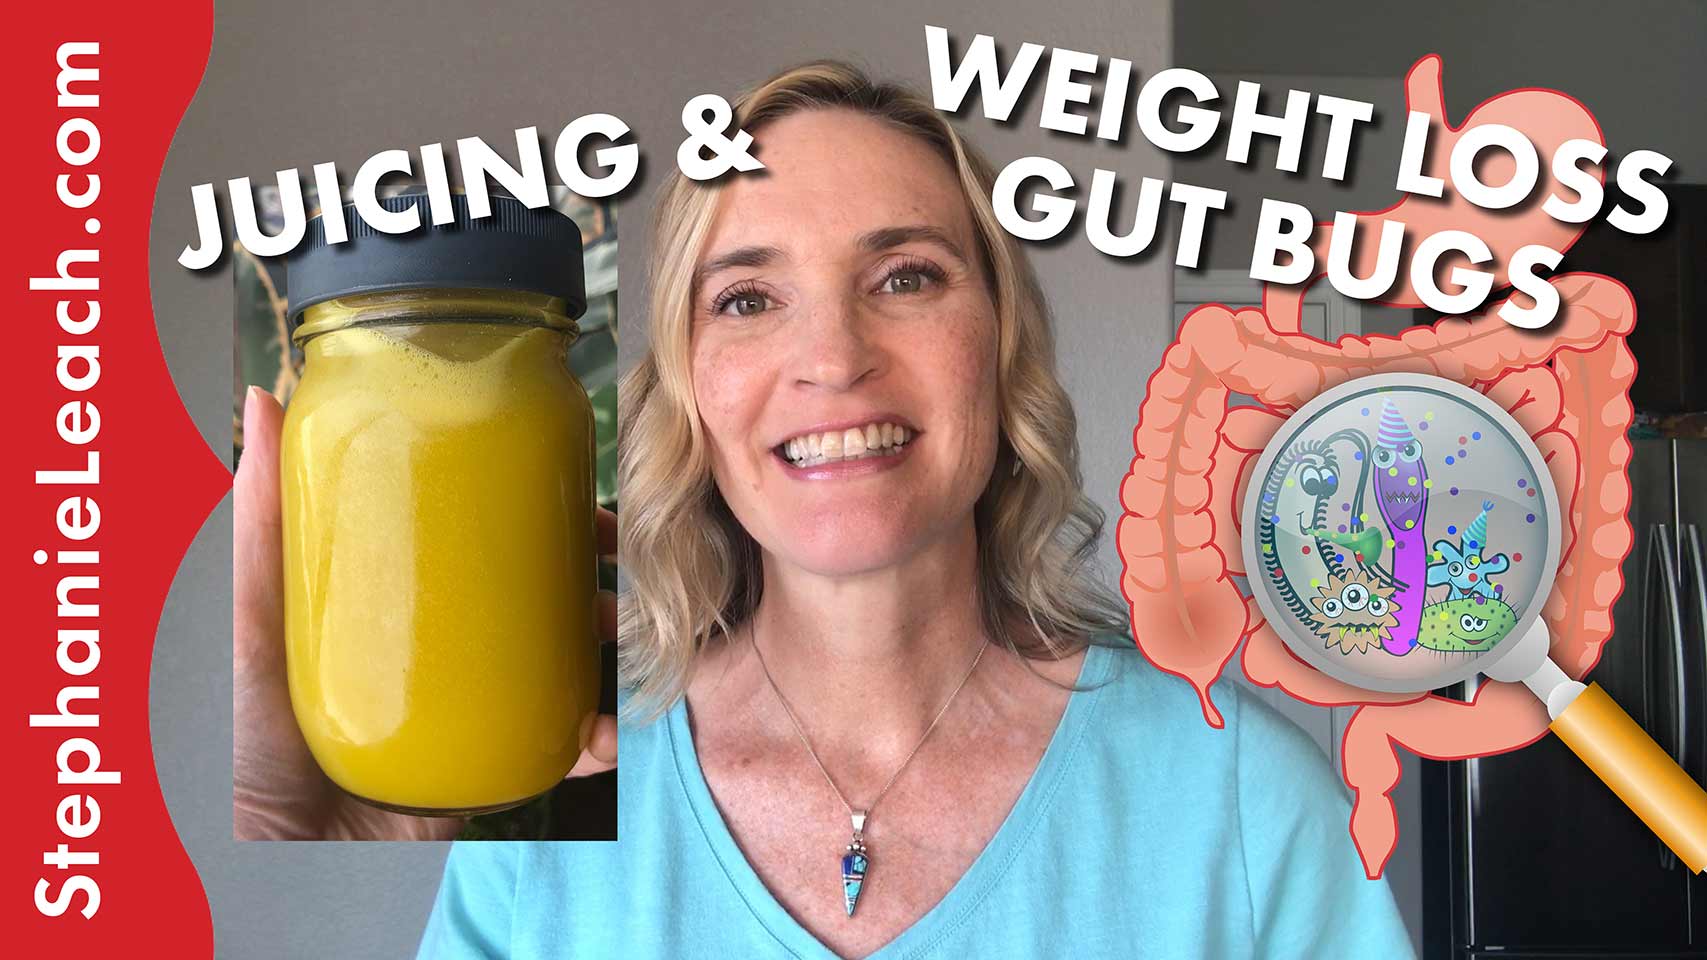 Juicing, Weight Loss & Your Microbiome (3-day juice fast results)